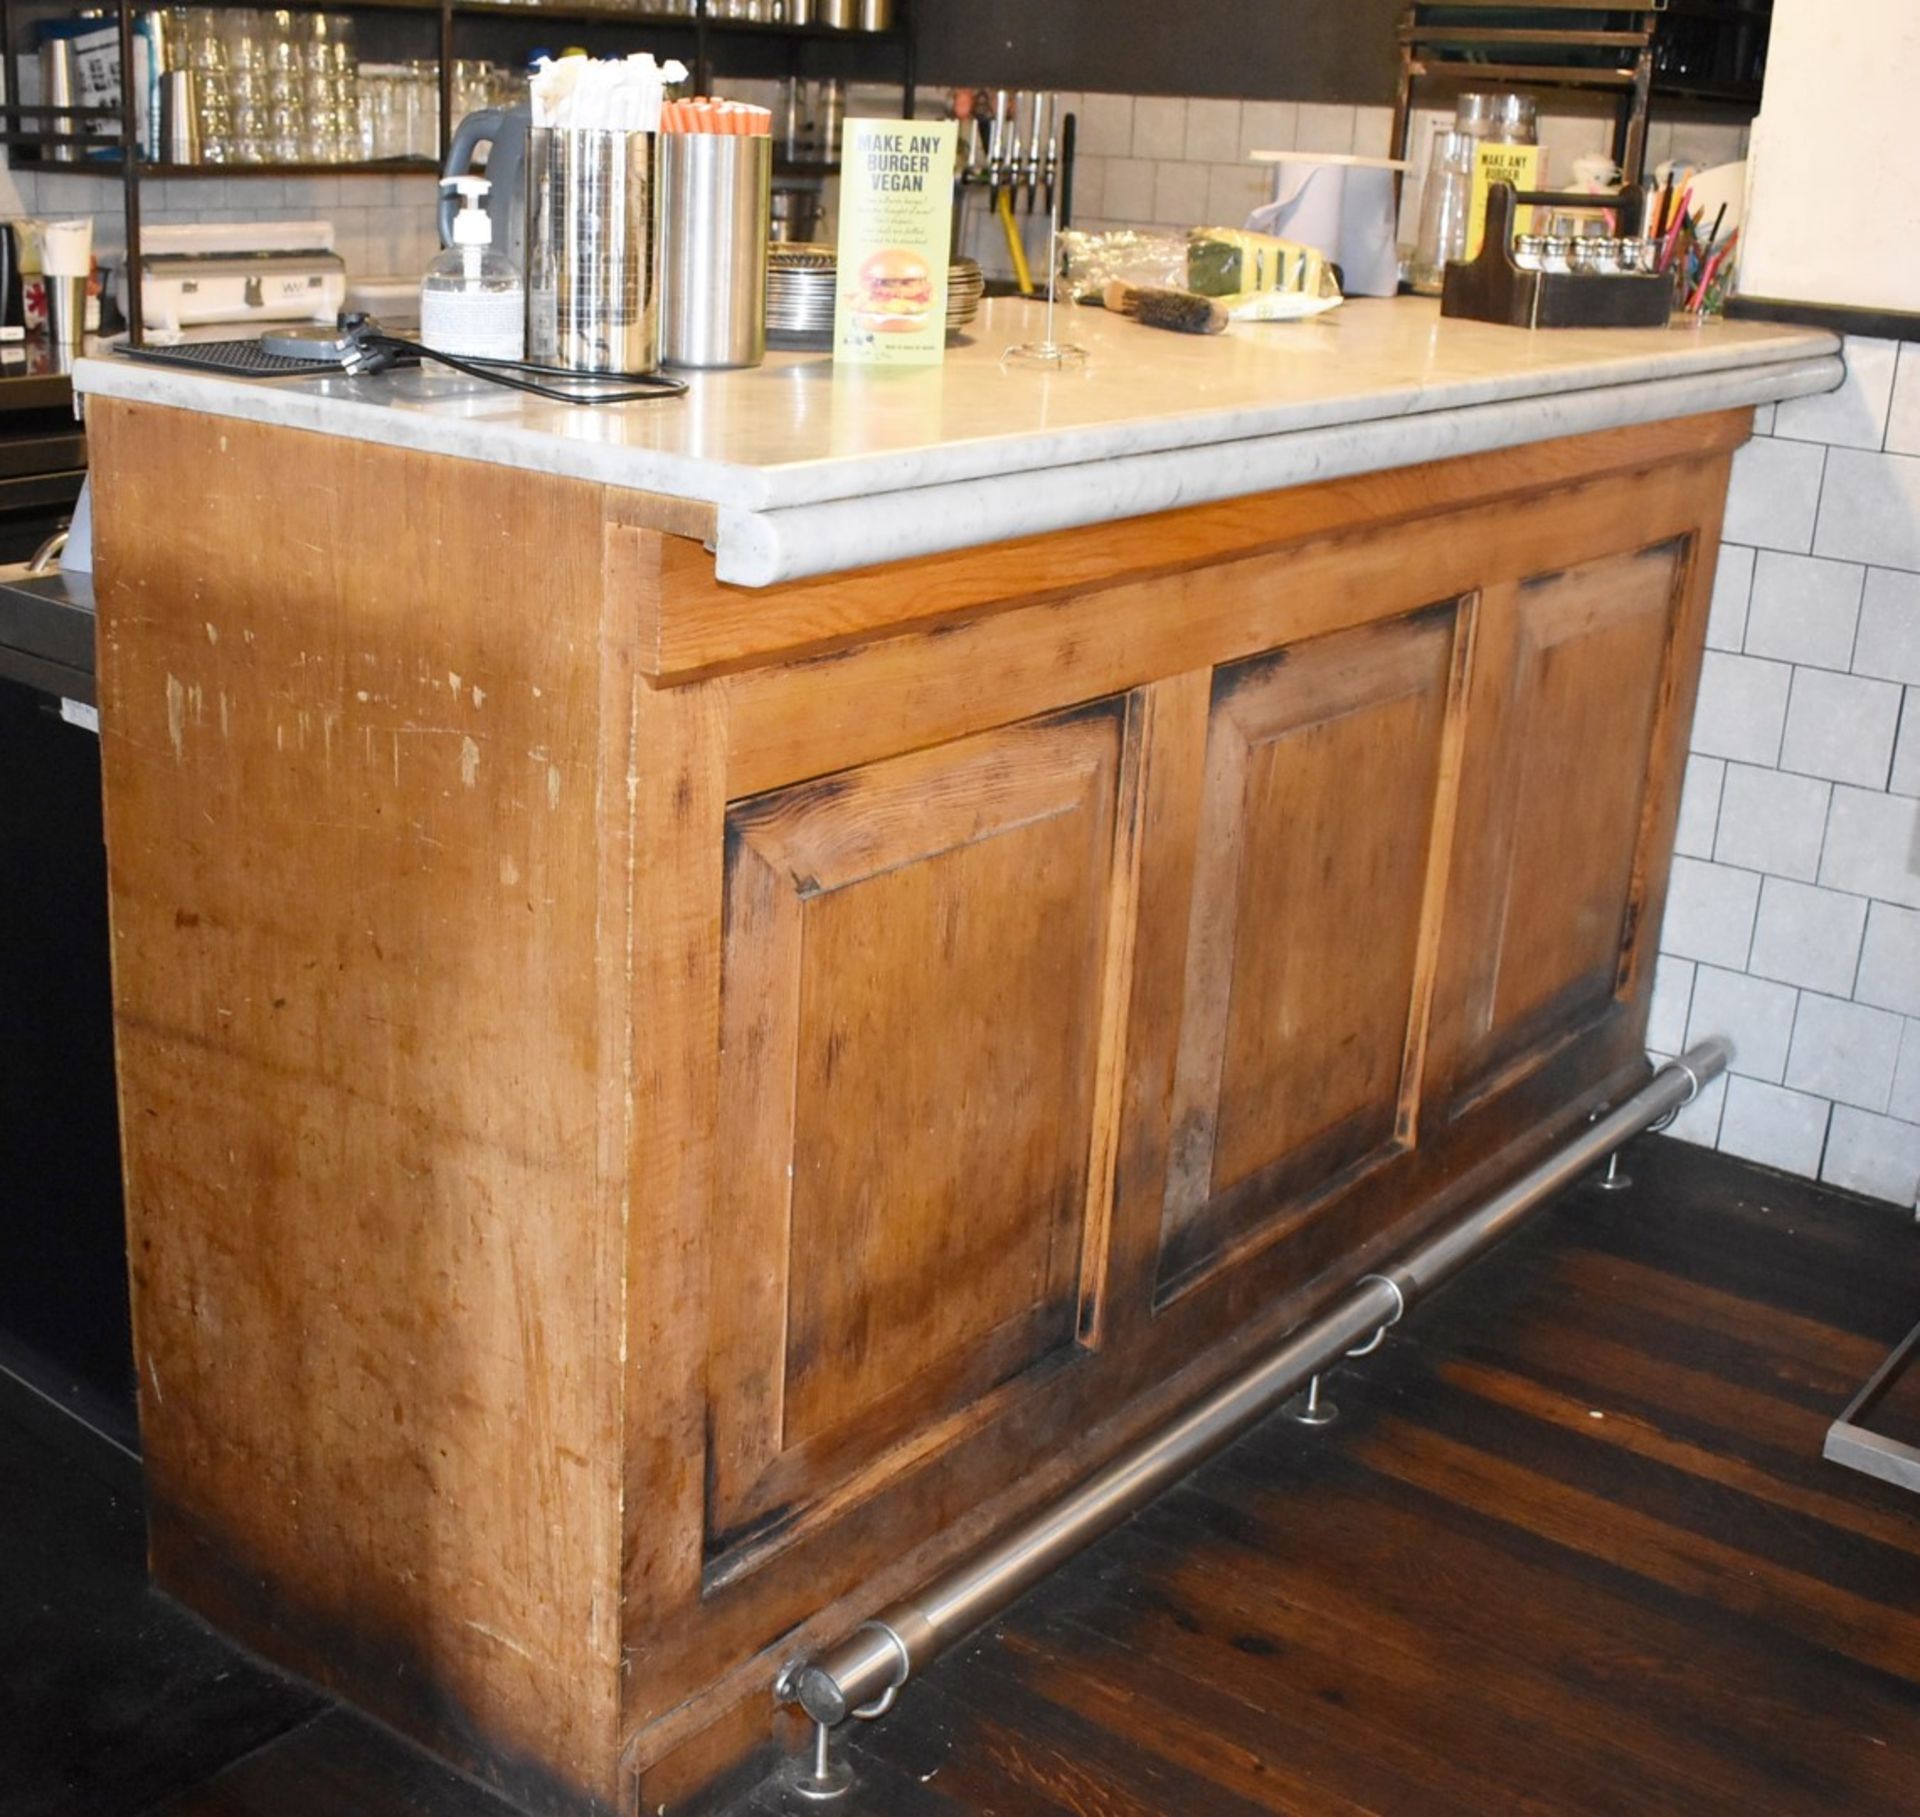 1 x Large 30ft Wood Panel Bar With White Marble Top, Heated Glass Gantry and Chrome Foot Rail - Image 2 of 22